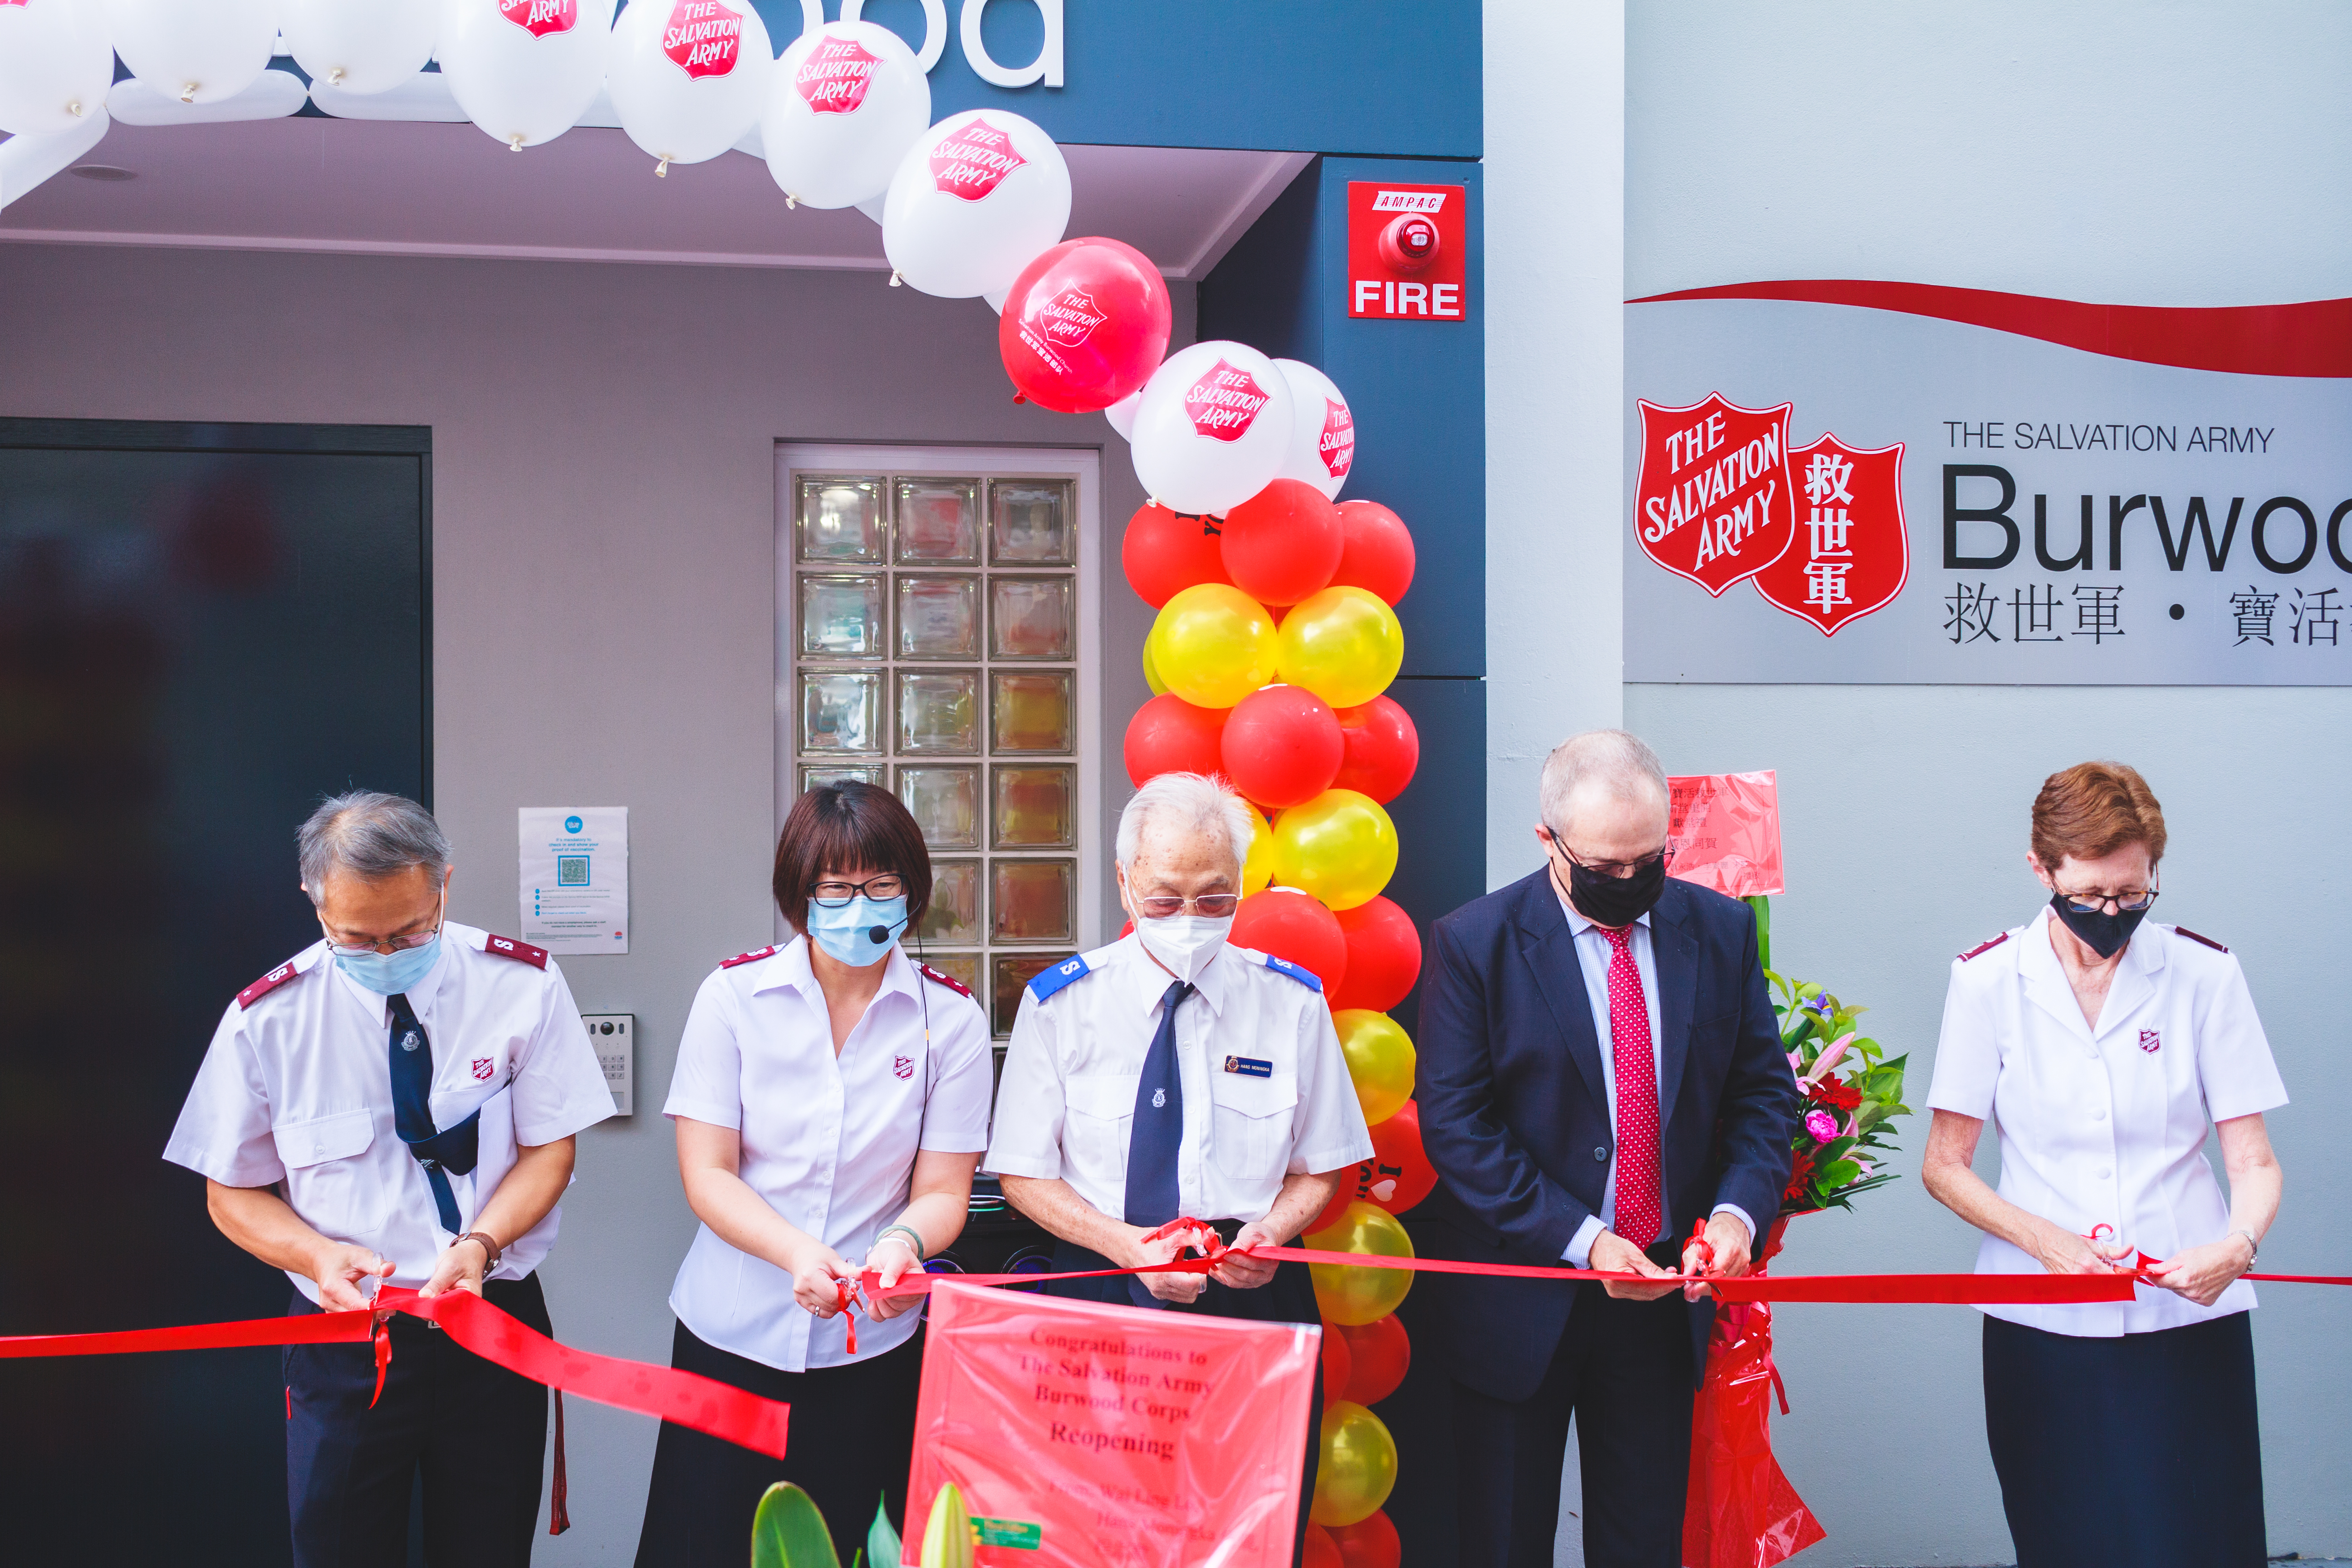 The Salvation Army Burwood Corps - Ground Re-opening - Cutting of Ribbon